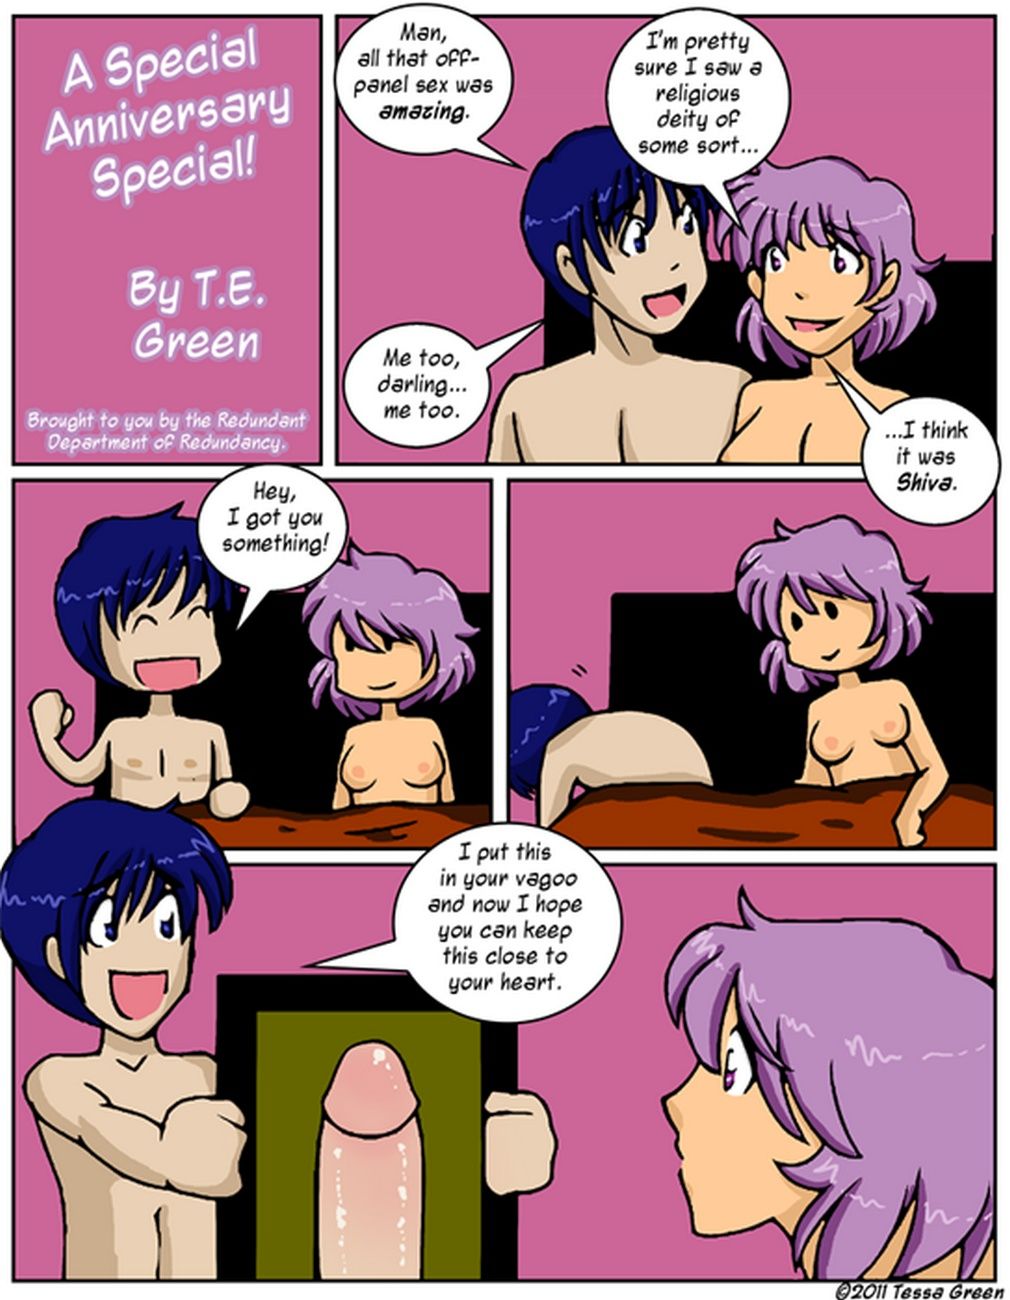 Love Box 2 - Anniversary Special page 2